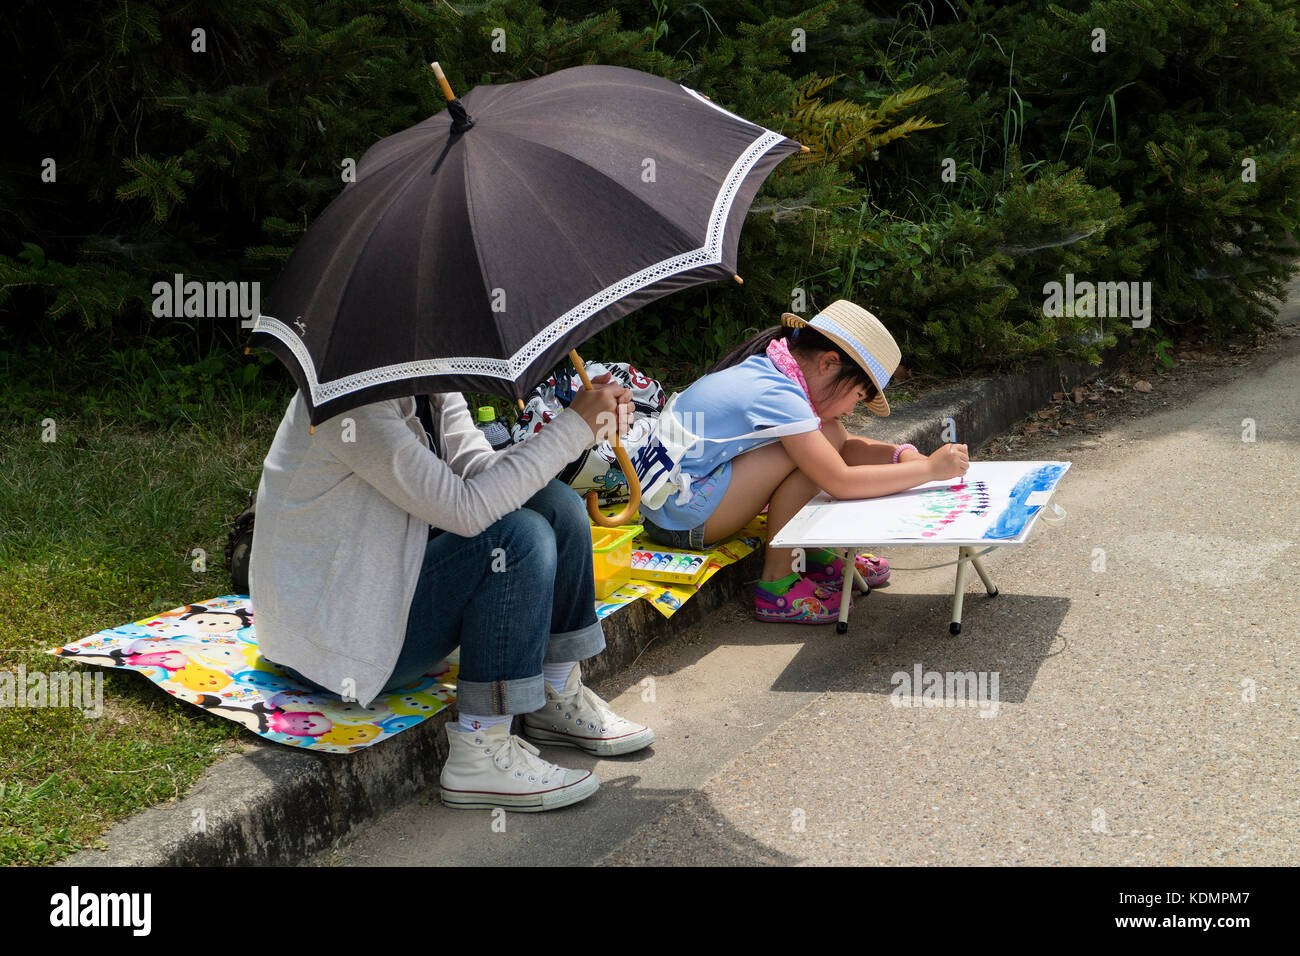 Kyoto, Japan - May 21, 2017: Child is painting in the Kyoto botanical garden to learn the shape of flowers and plants Stock Photo